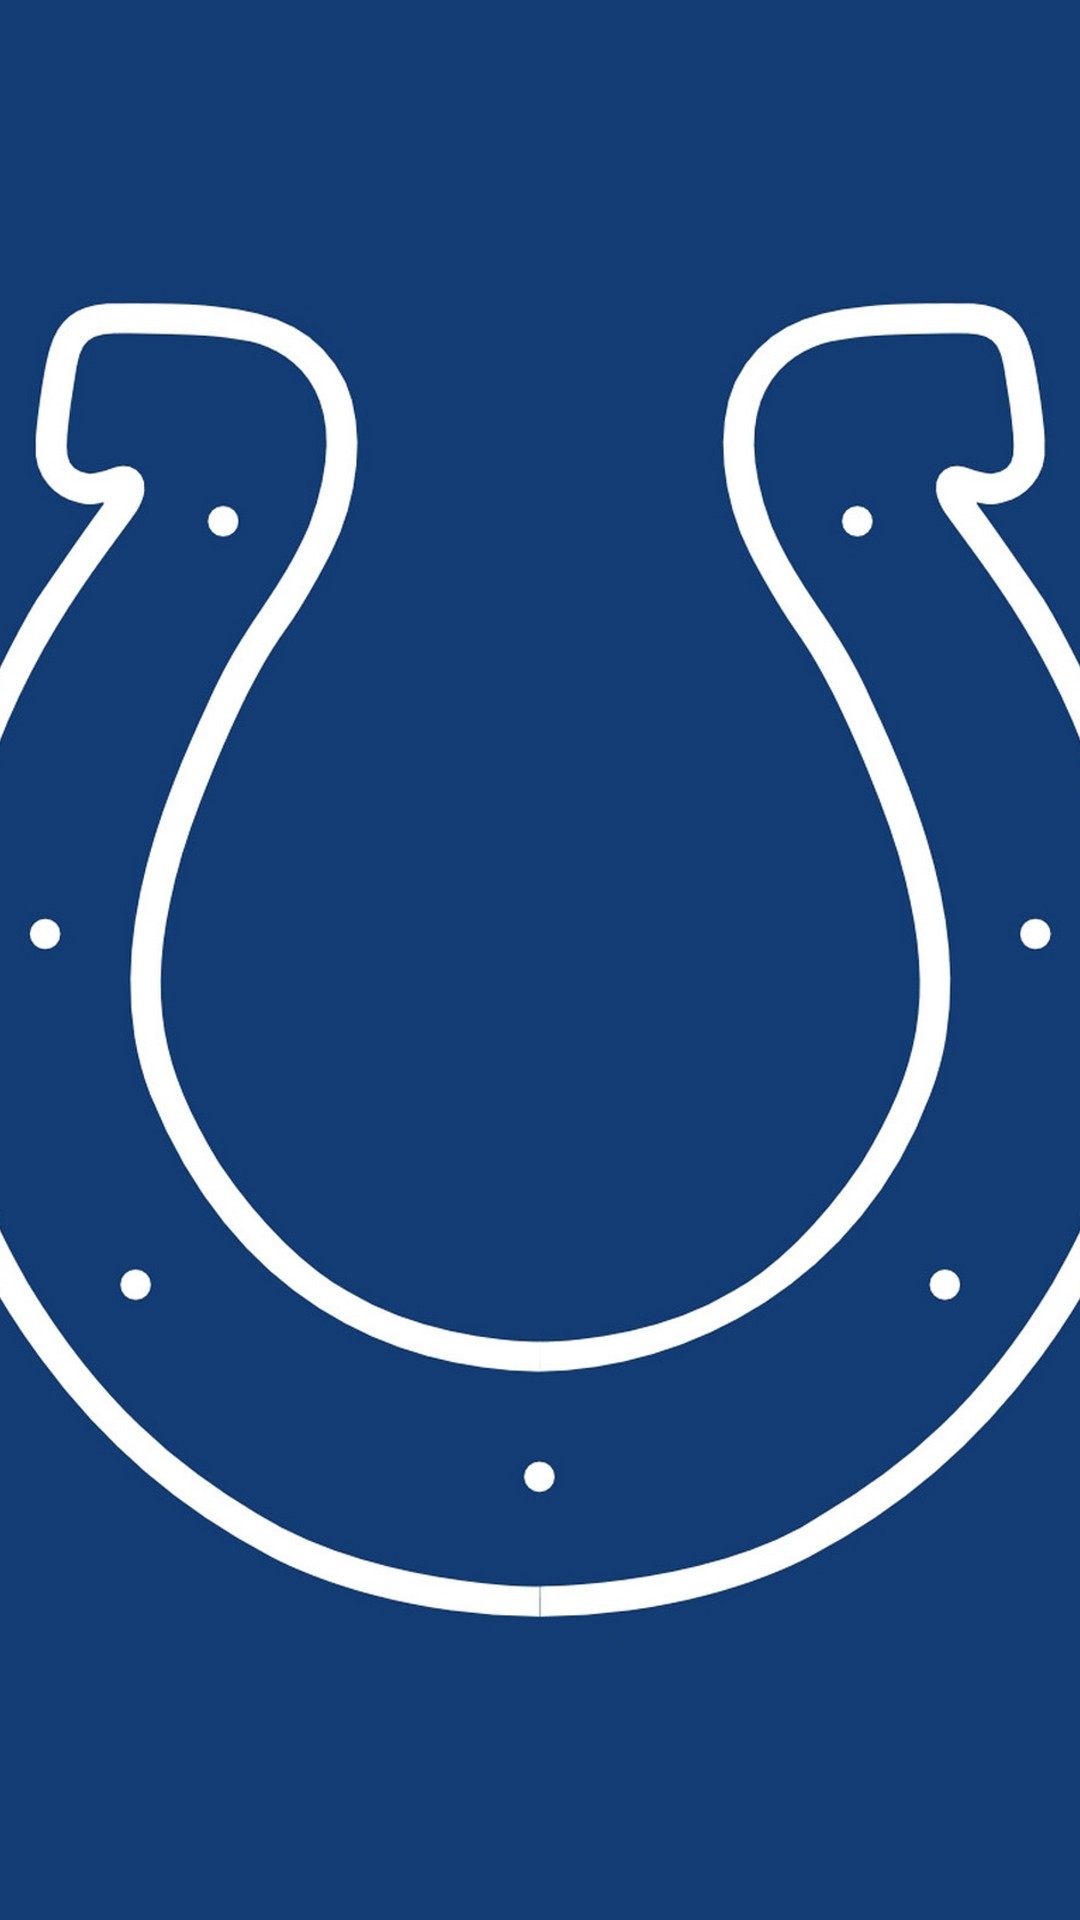 Indianapolis Colts iPhone X Wallpaper With high-resolution 1080X1920 pixel. You can use this wallpaper for your Mac or Windows Desktop Background, iPhone, Android or Tablet and another Smartphone device